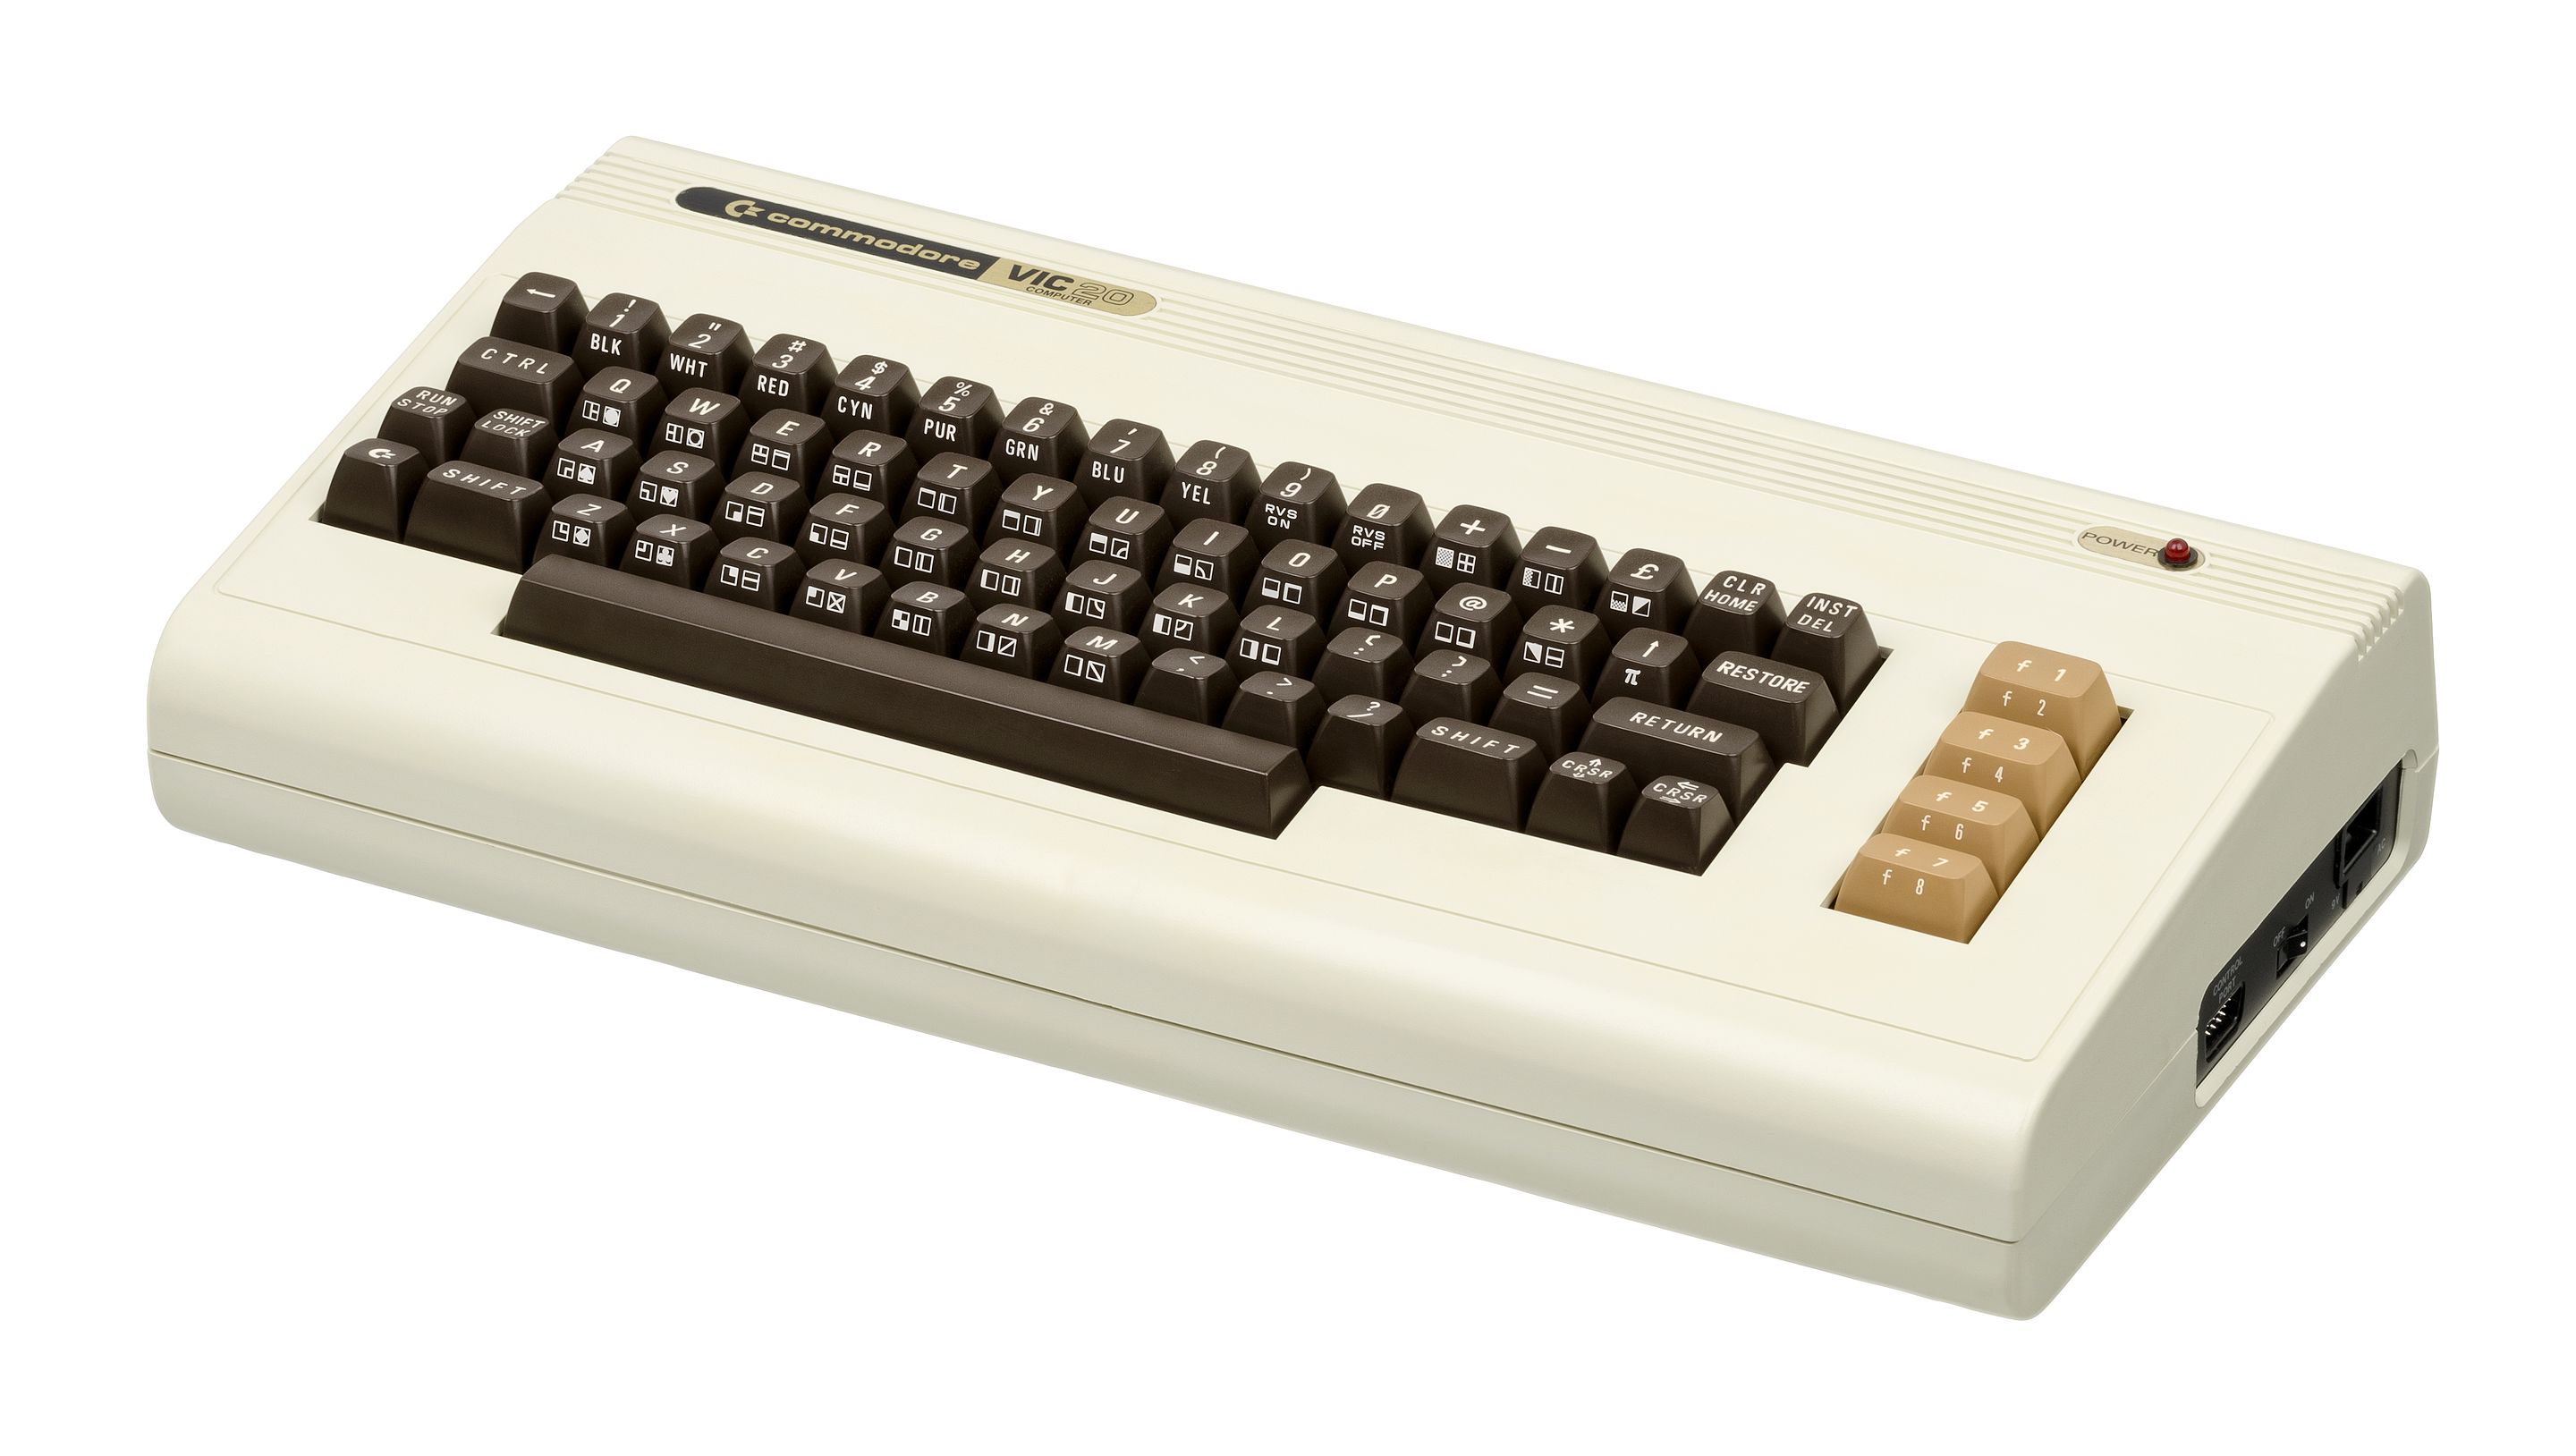 My first computer -- a Commodore VIC-20.